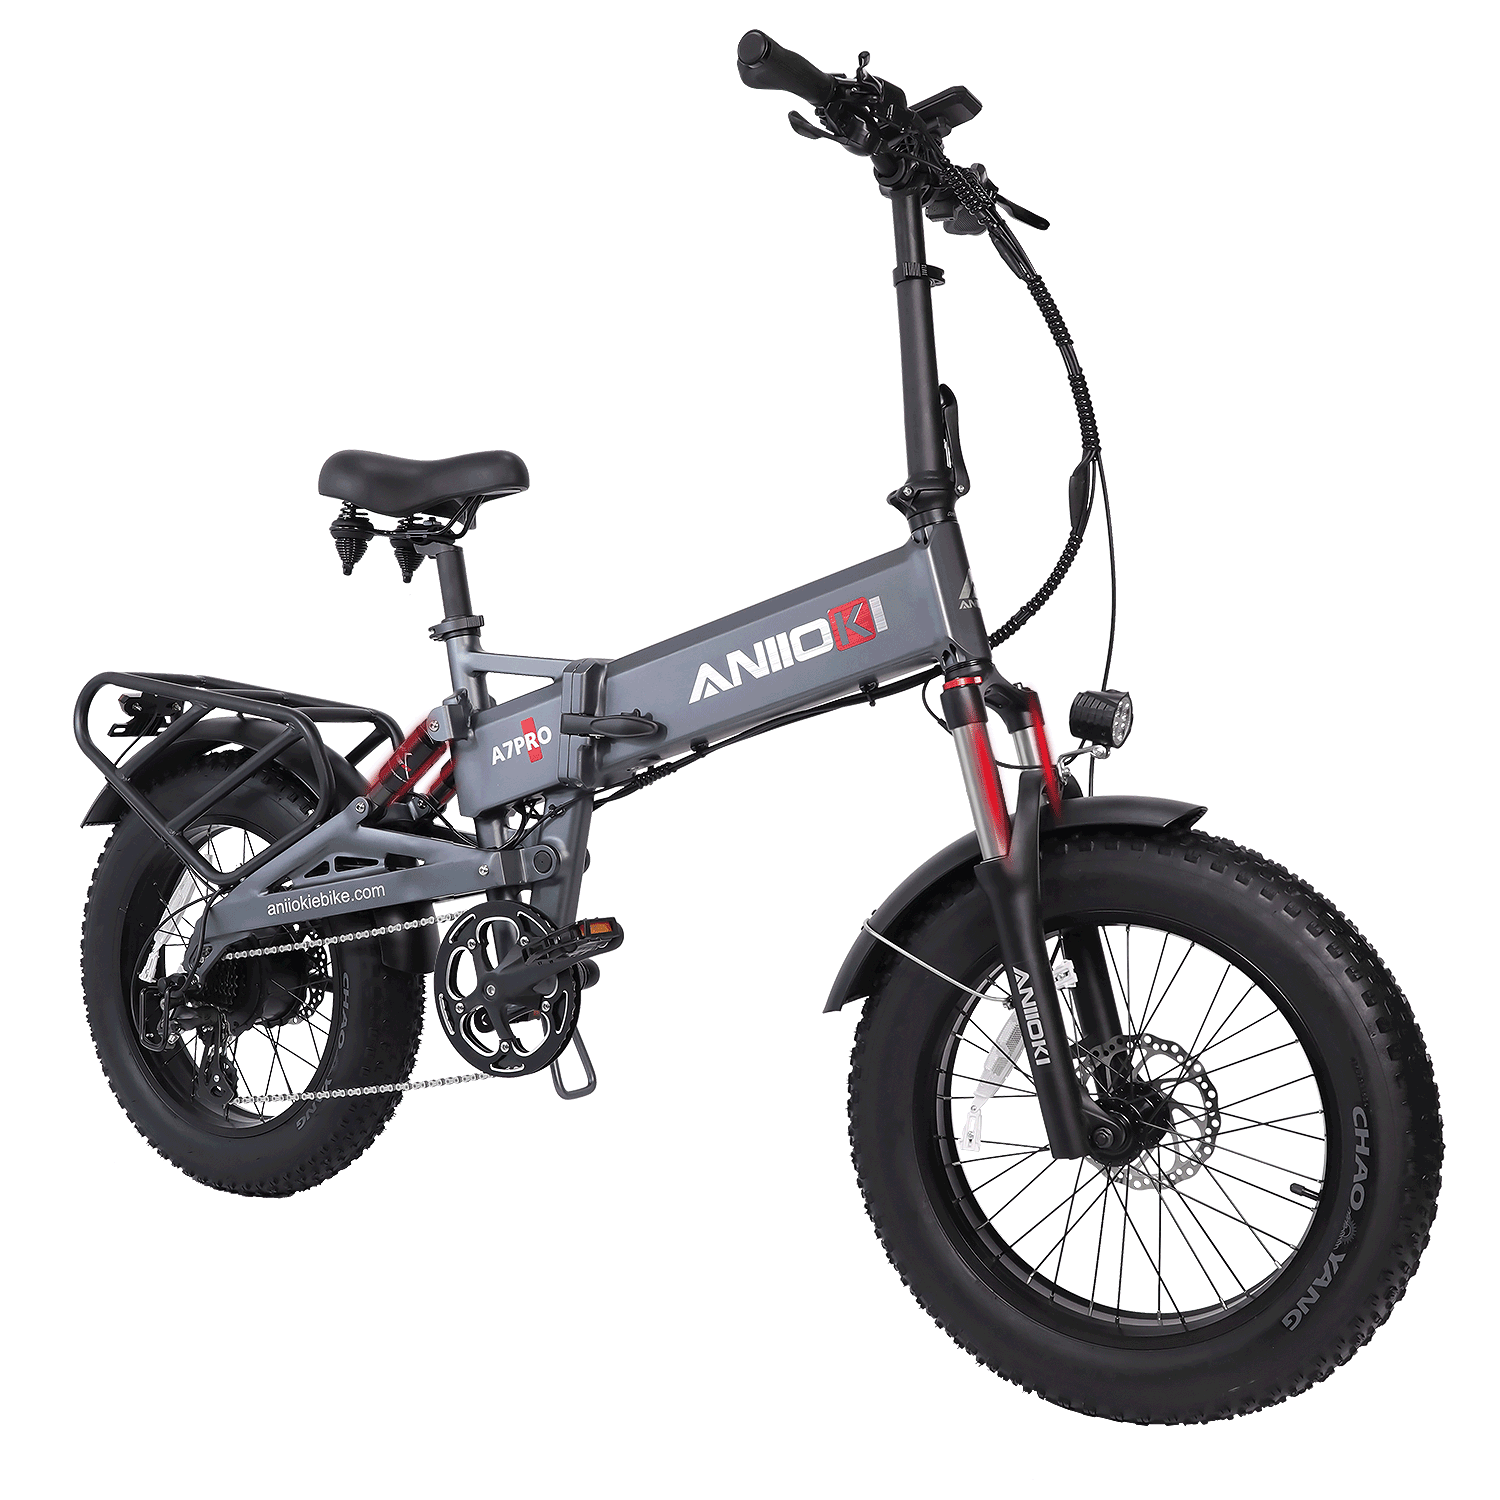 Wallke A7-PRO-foldable bicycle, easy to carry, does not take up space, and brings more convenience to your travel